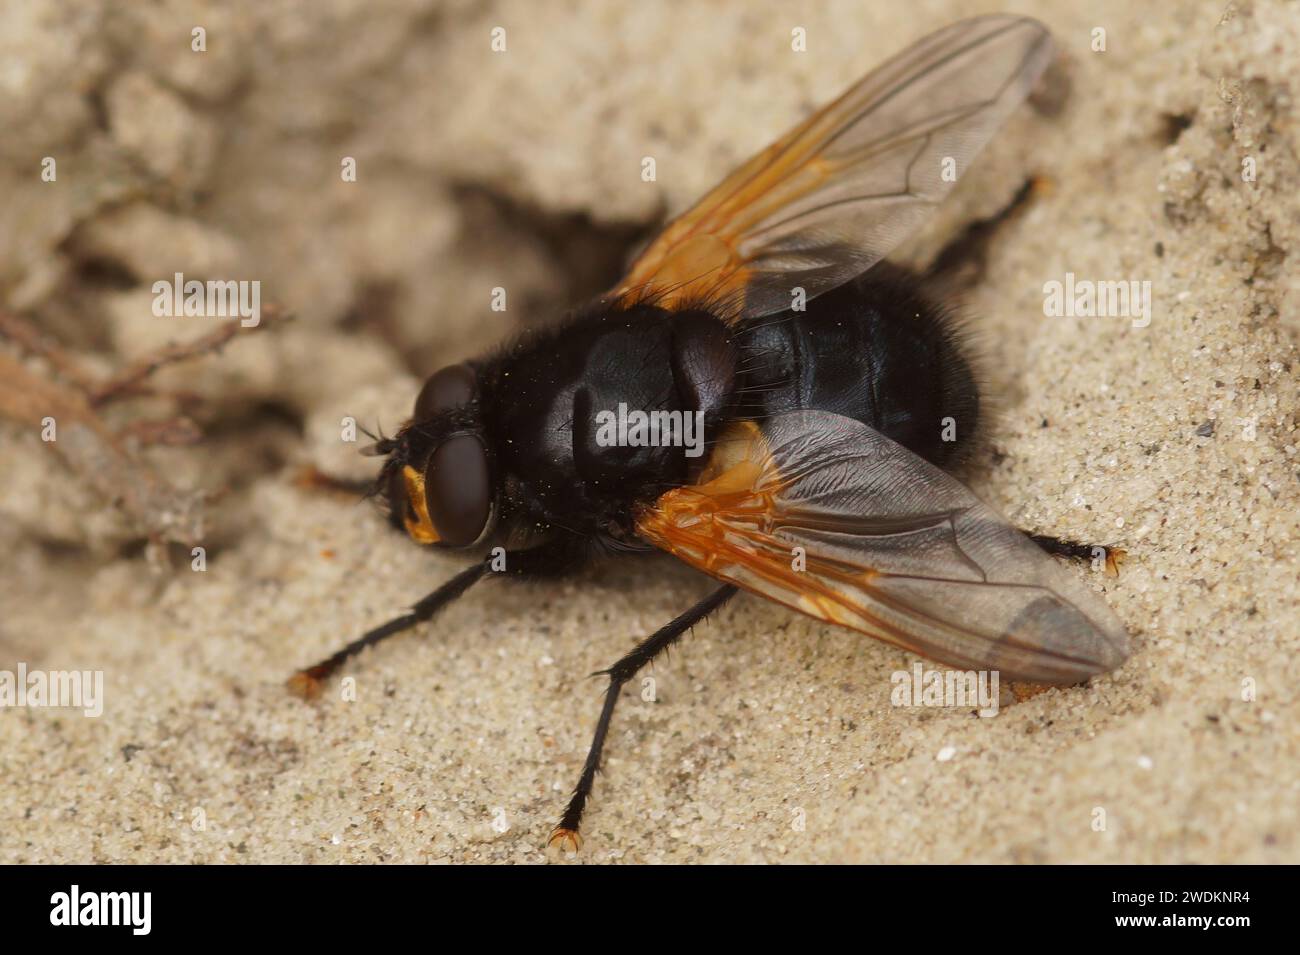 Natural dorsal closeup of a colorful black noon or noonday fly, Mesembrina meridiana fly sitting on the ground in the field Stock Photo